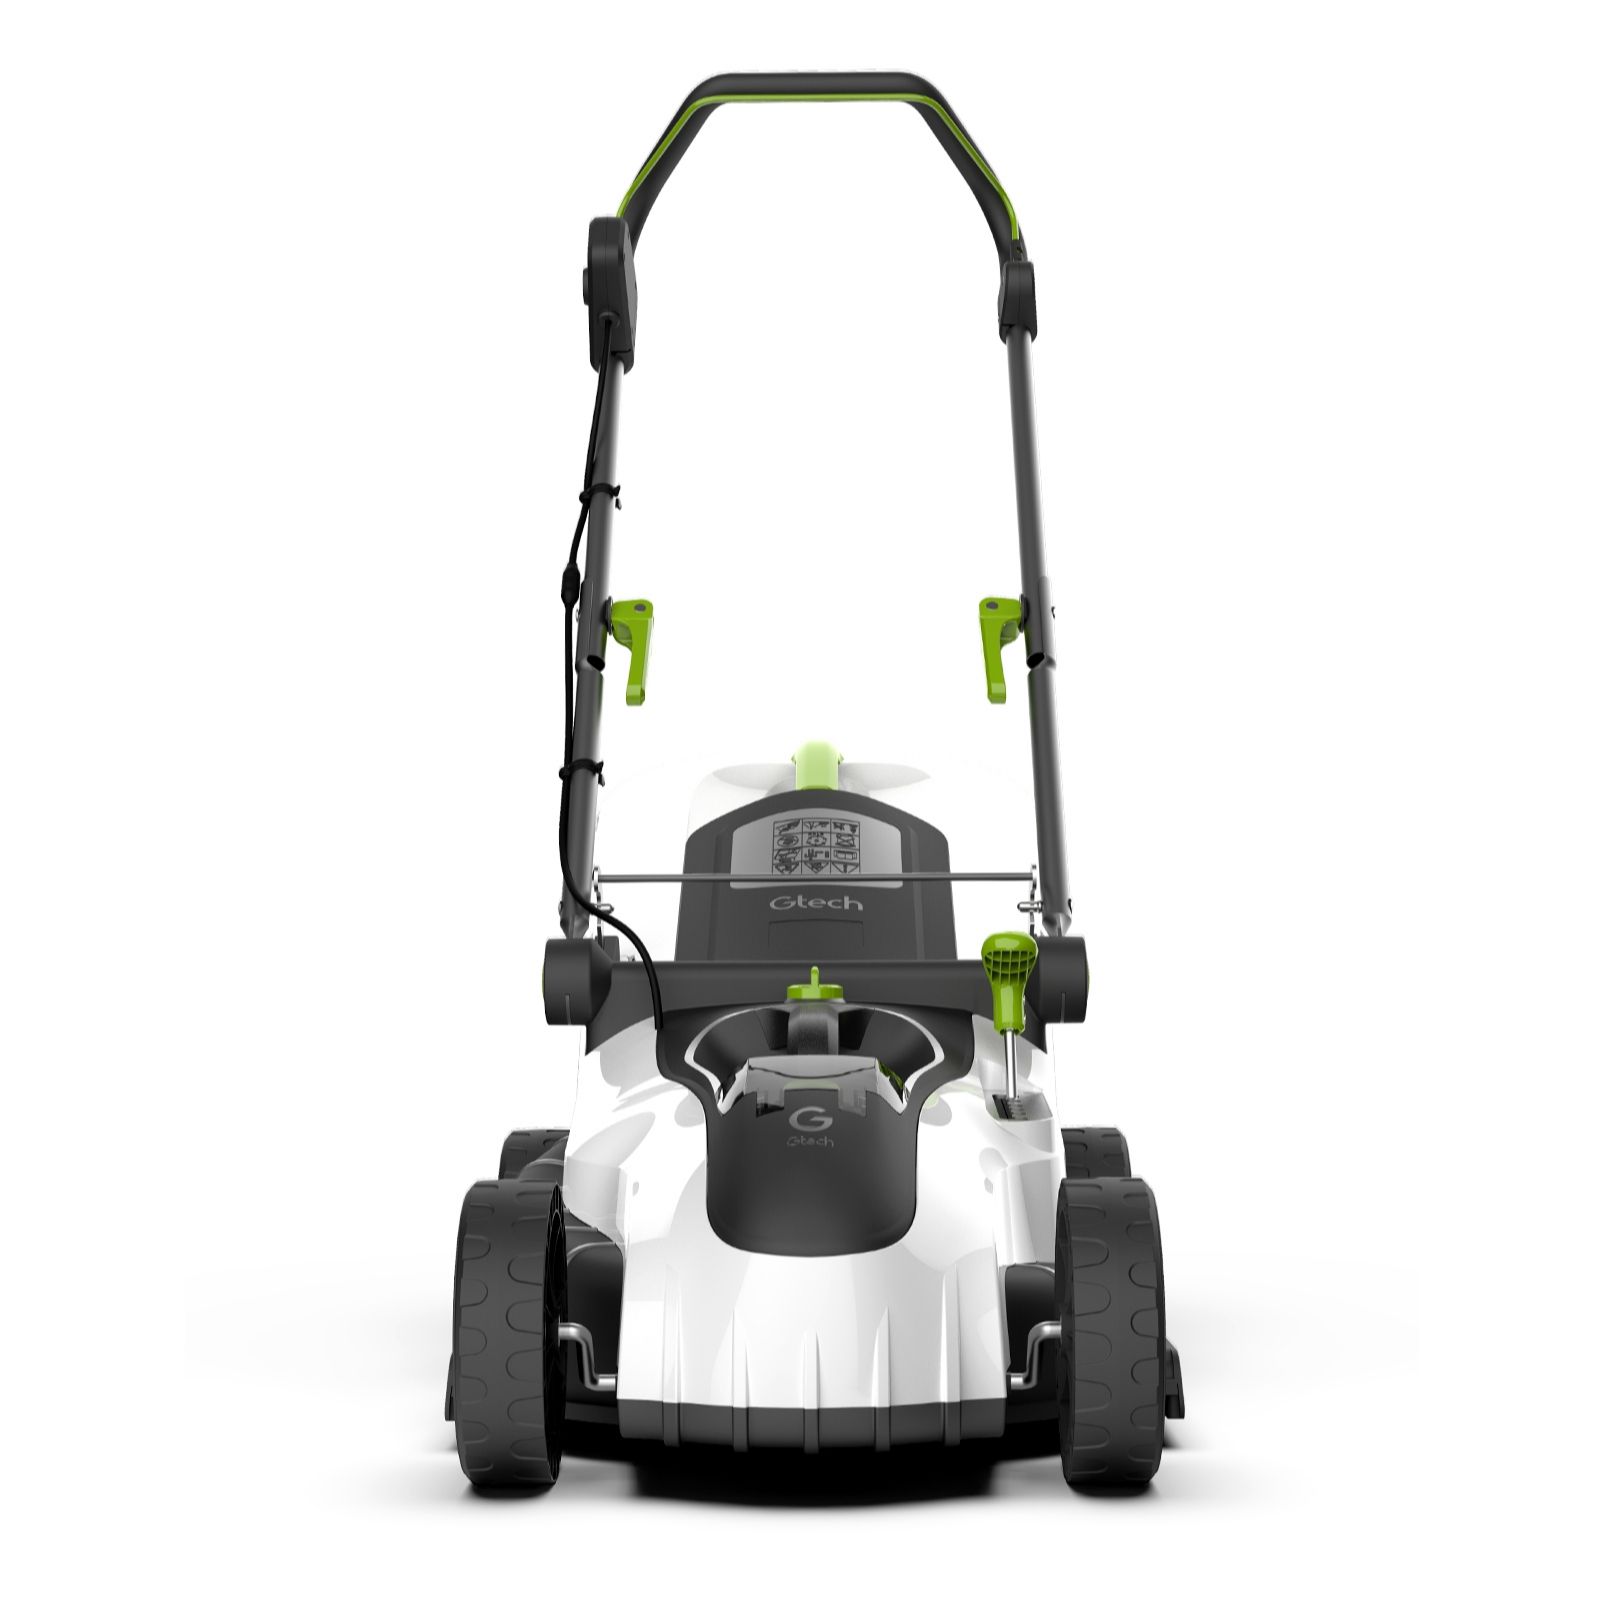 Gtech Clm50 48v Cordless Lawnmower W 1 Hour Charger And 42cm Cutting